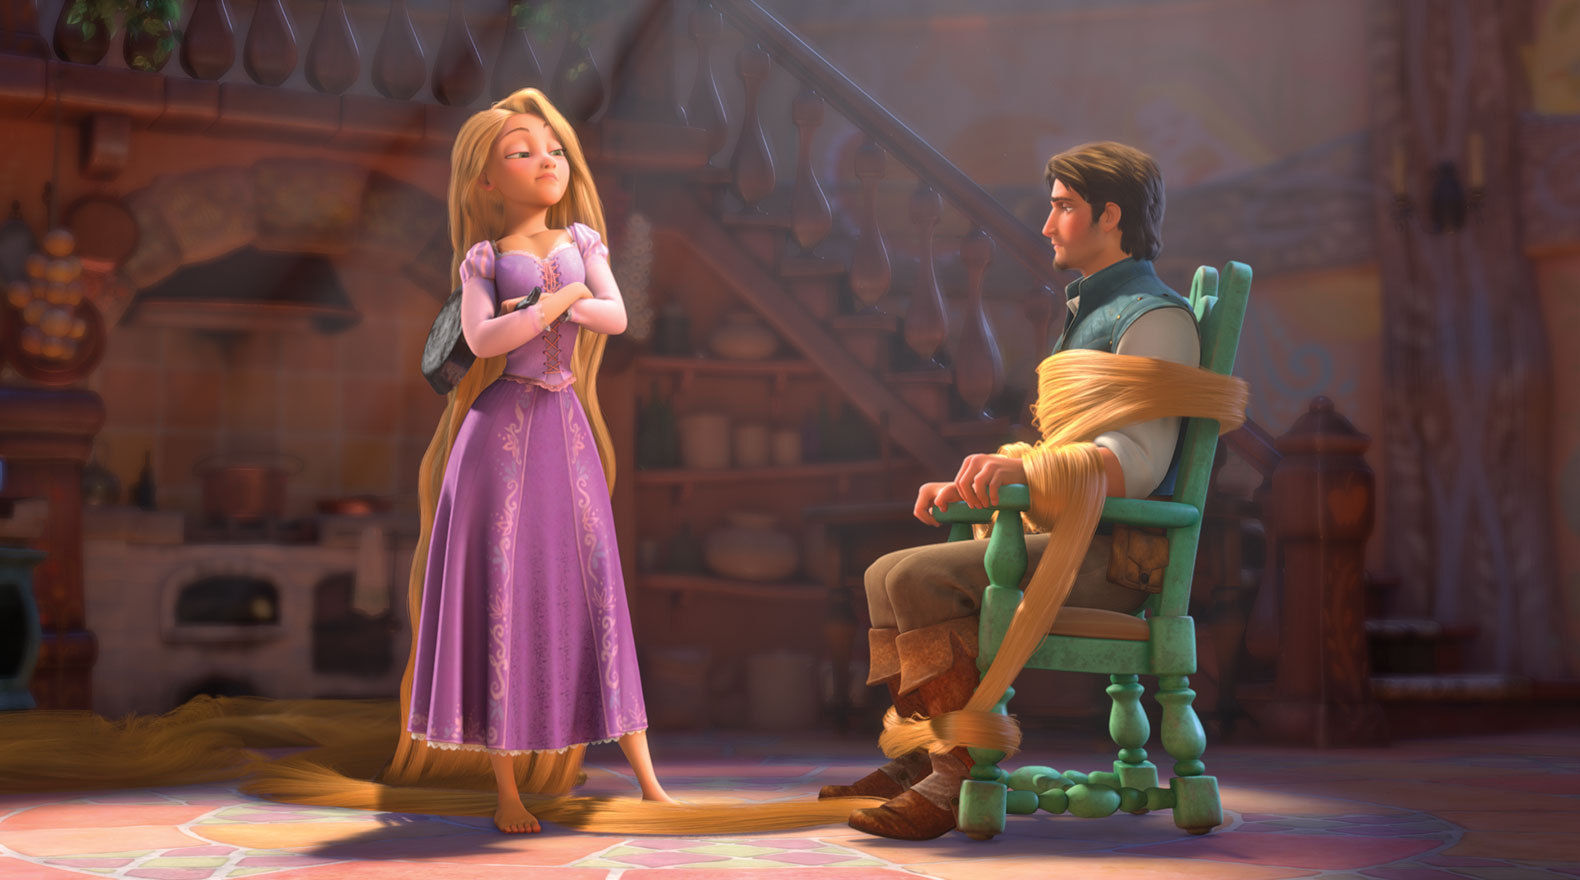 Tangled Pics, Movie Collection - Rapunzel And Flynn In Tower - 1580x880  Wallpaper 